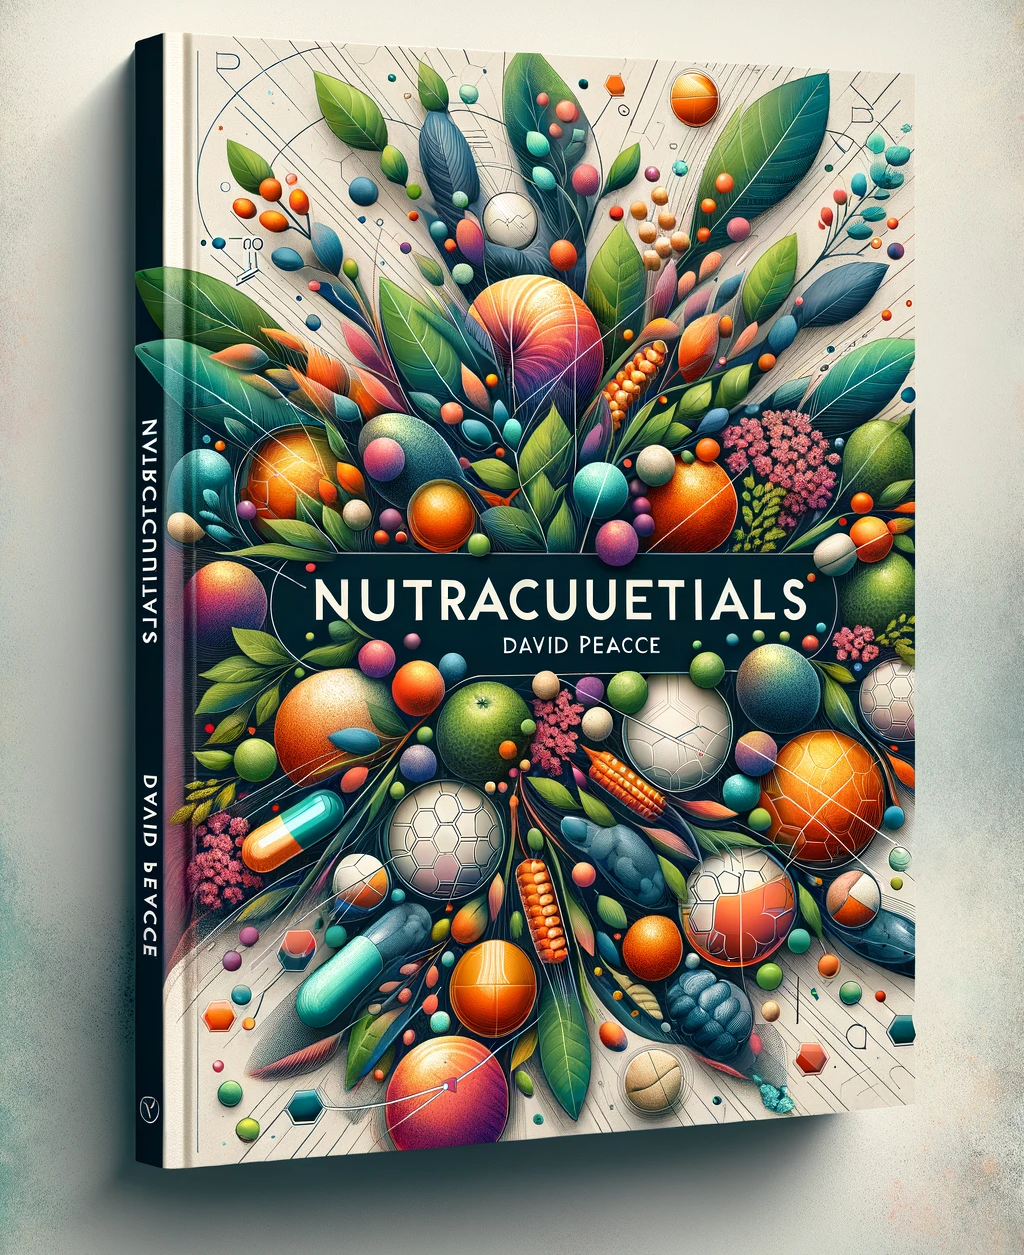 Nutraceuticals by David Pearce